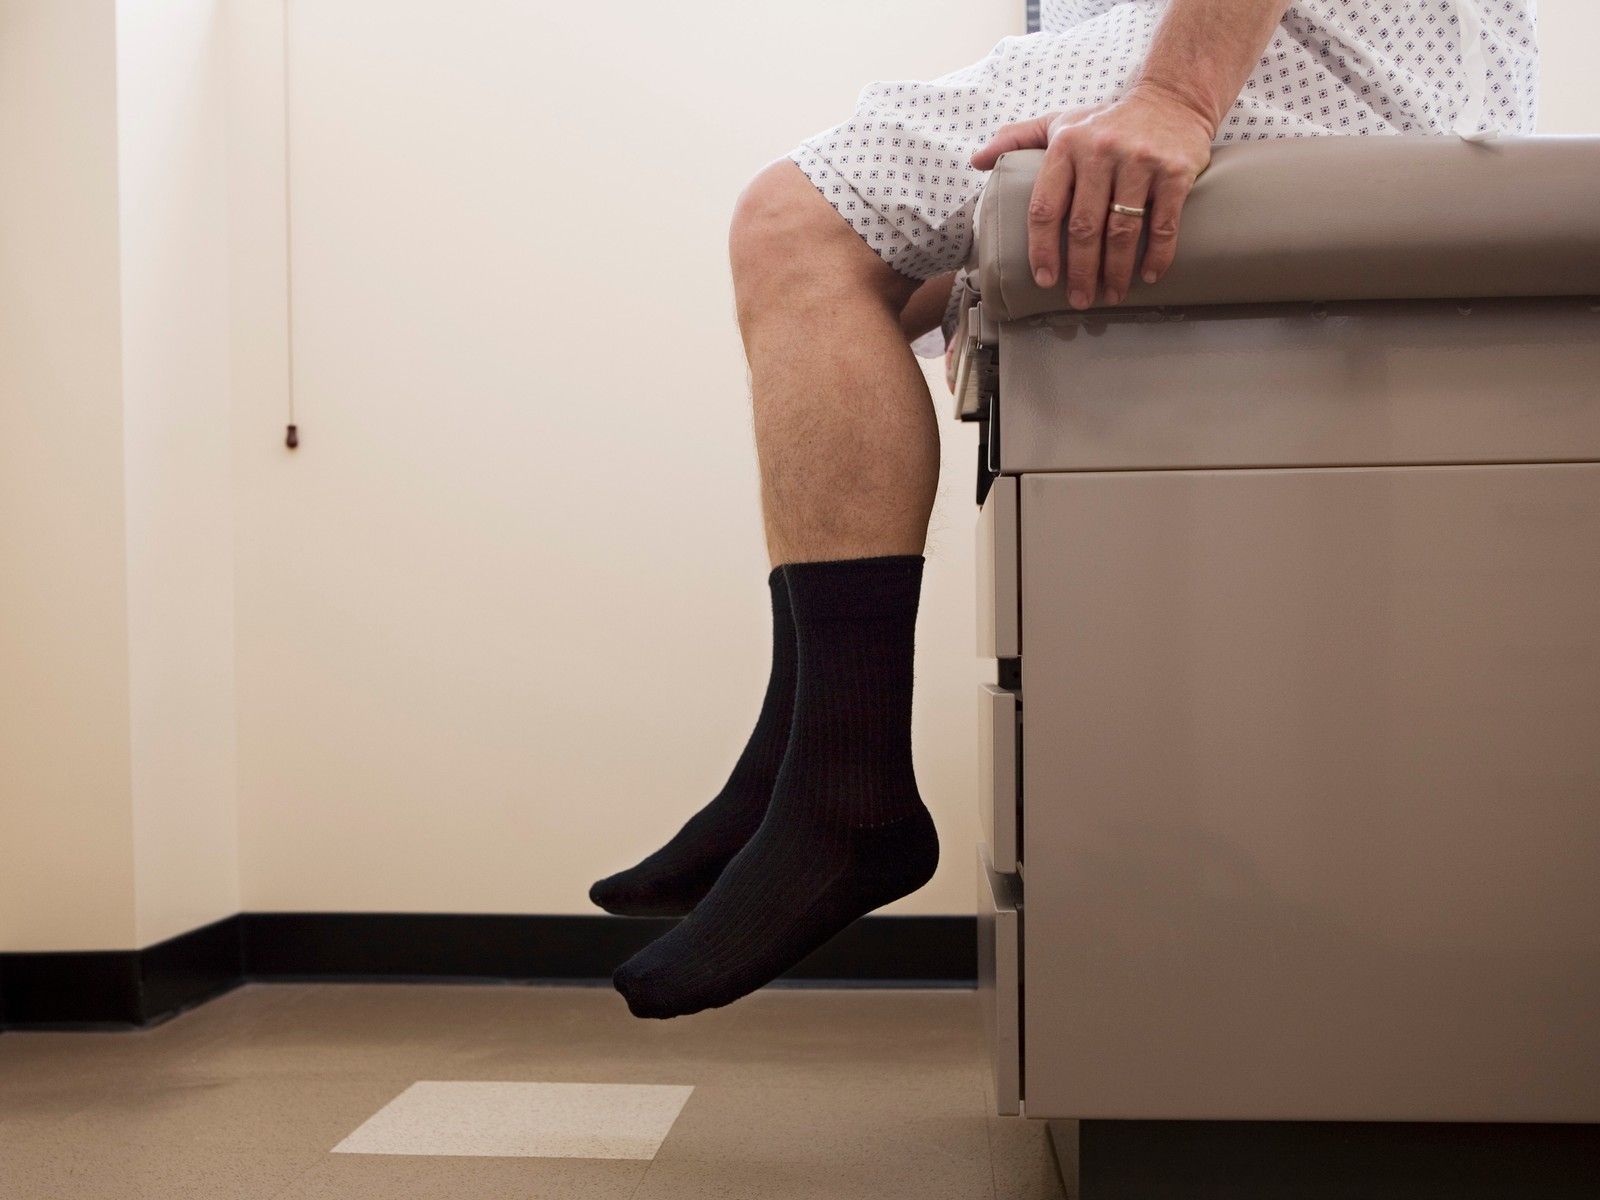 In 2014, more than 19 per cent of men in Canada did not have a regular medical doctor.